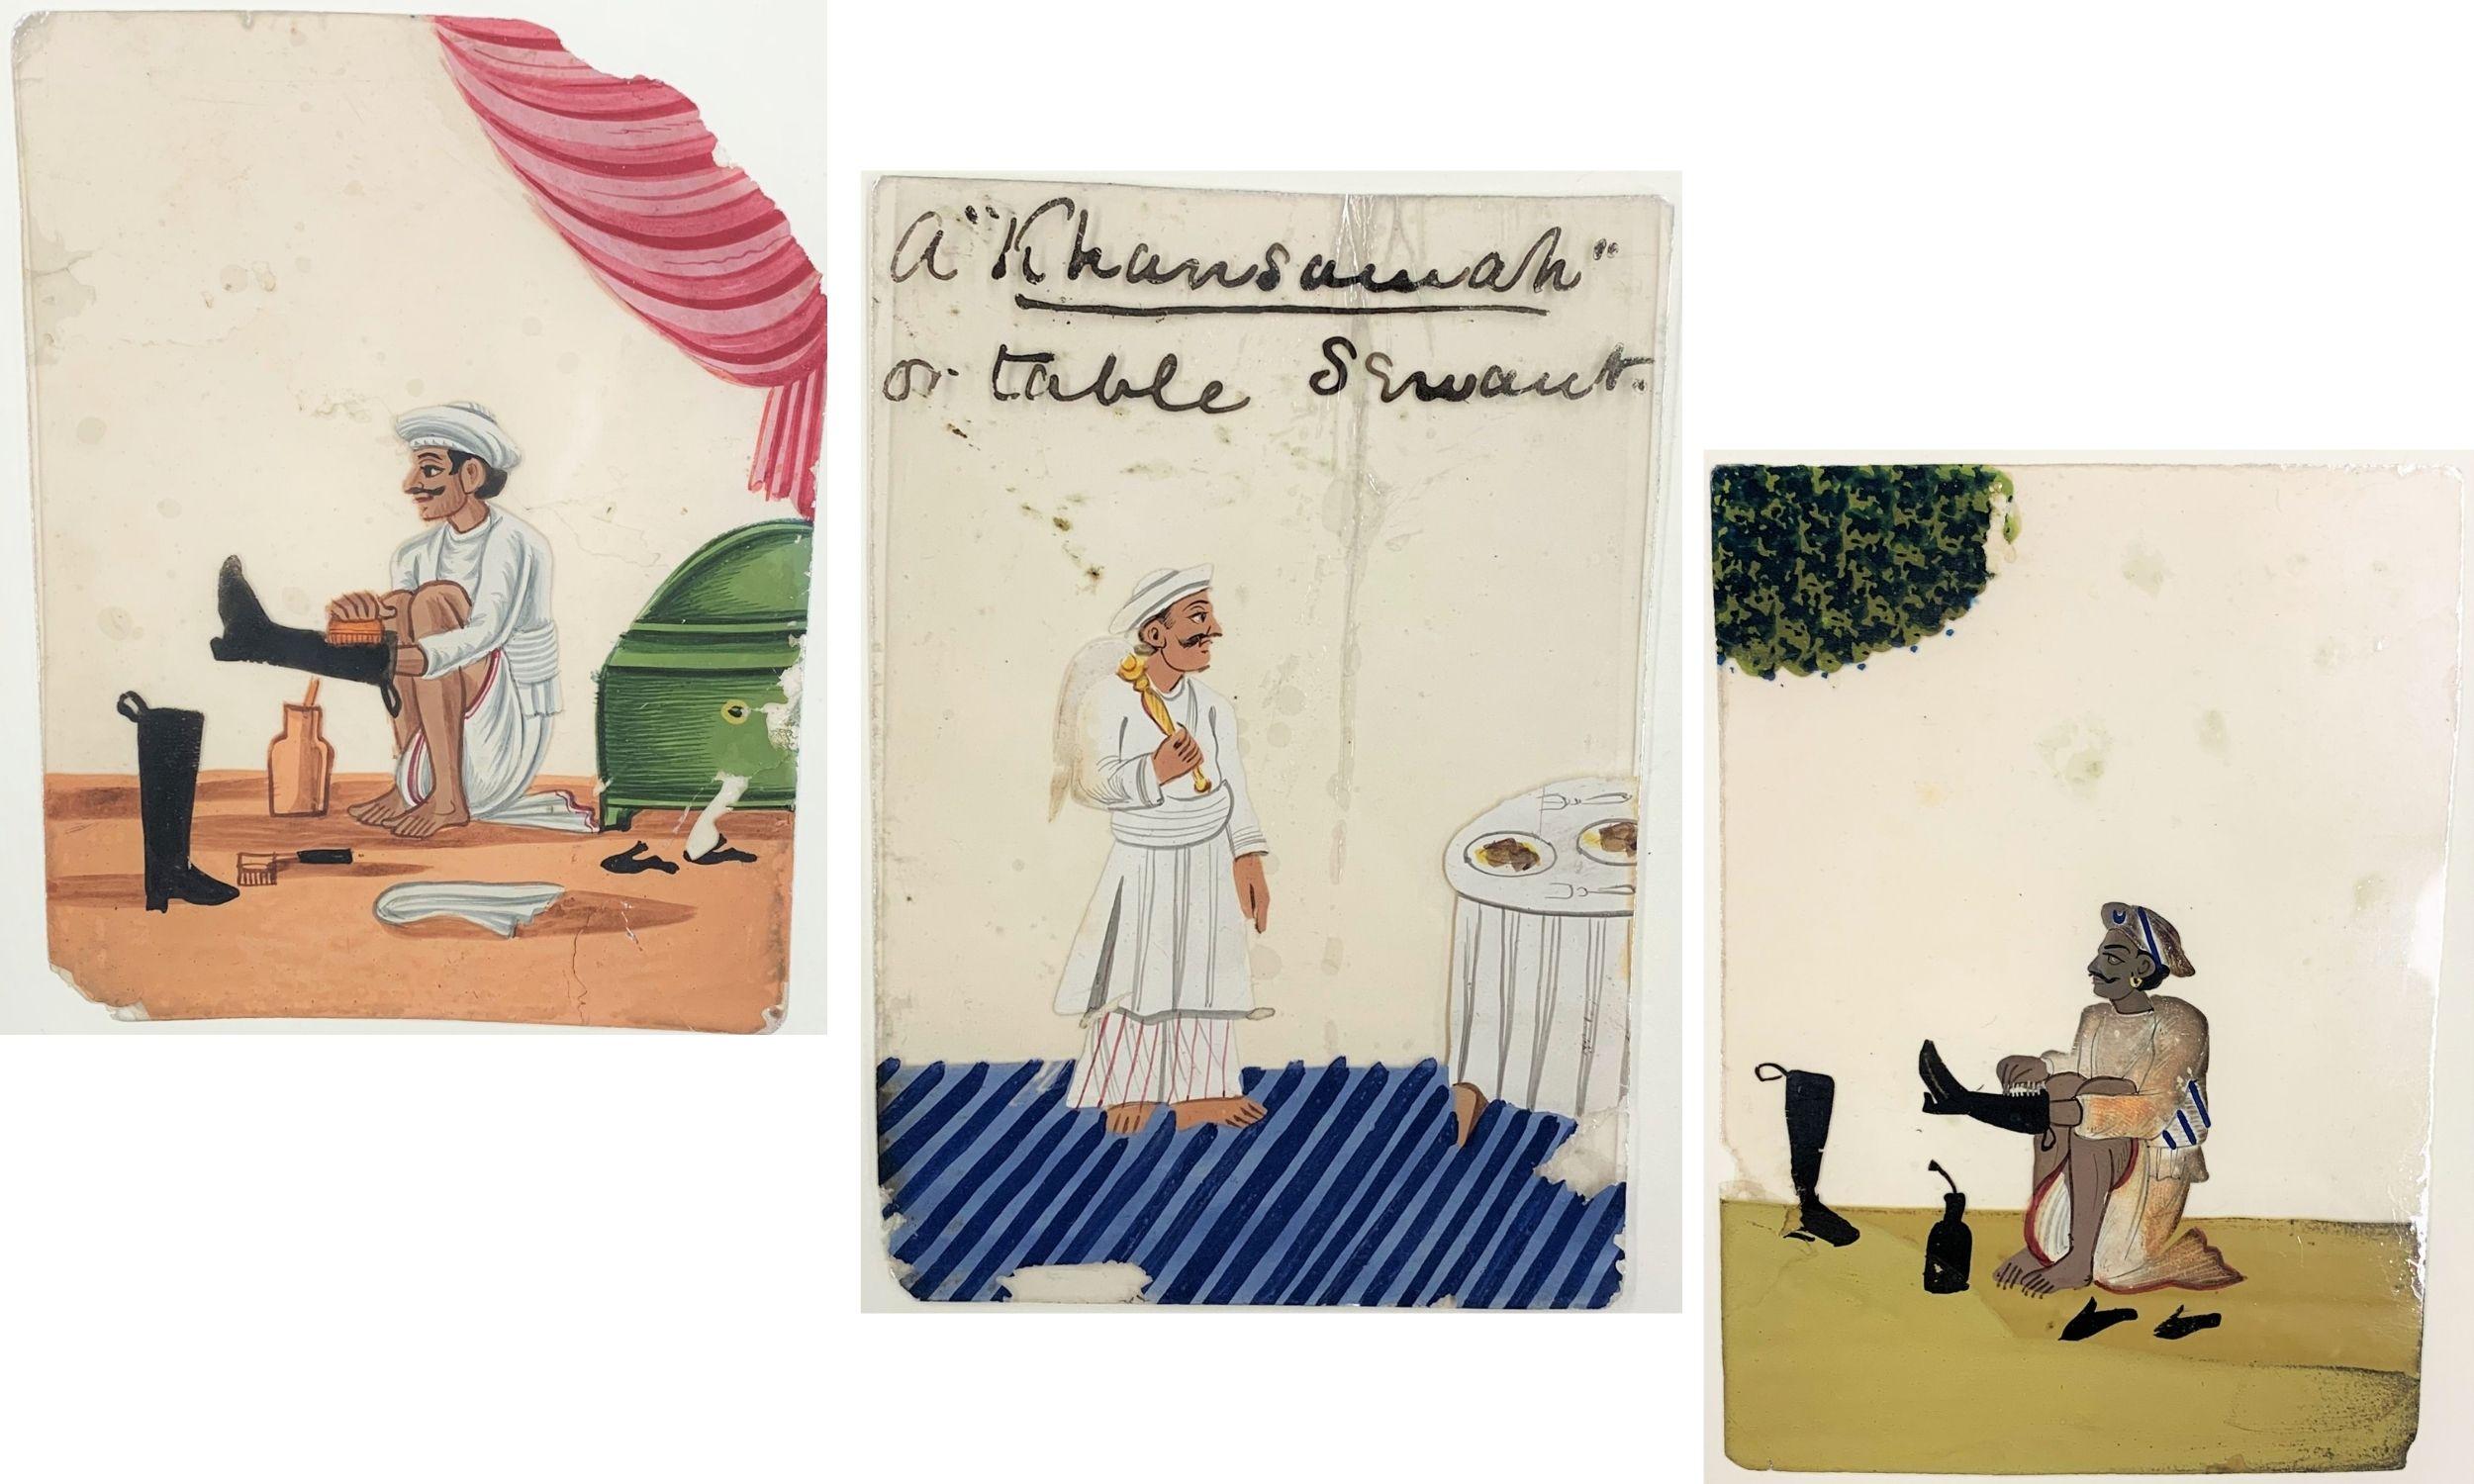 Three paintings of Indian men. The first has a man scrunched down shining his shoes with a red curtain and green chest in background. Second has a man approaching a round dinner table with blue floor beneath him. Third has a man scrunched down shining his boots underneath a tree. 